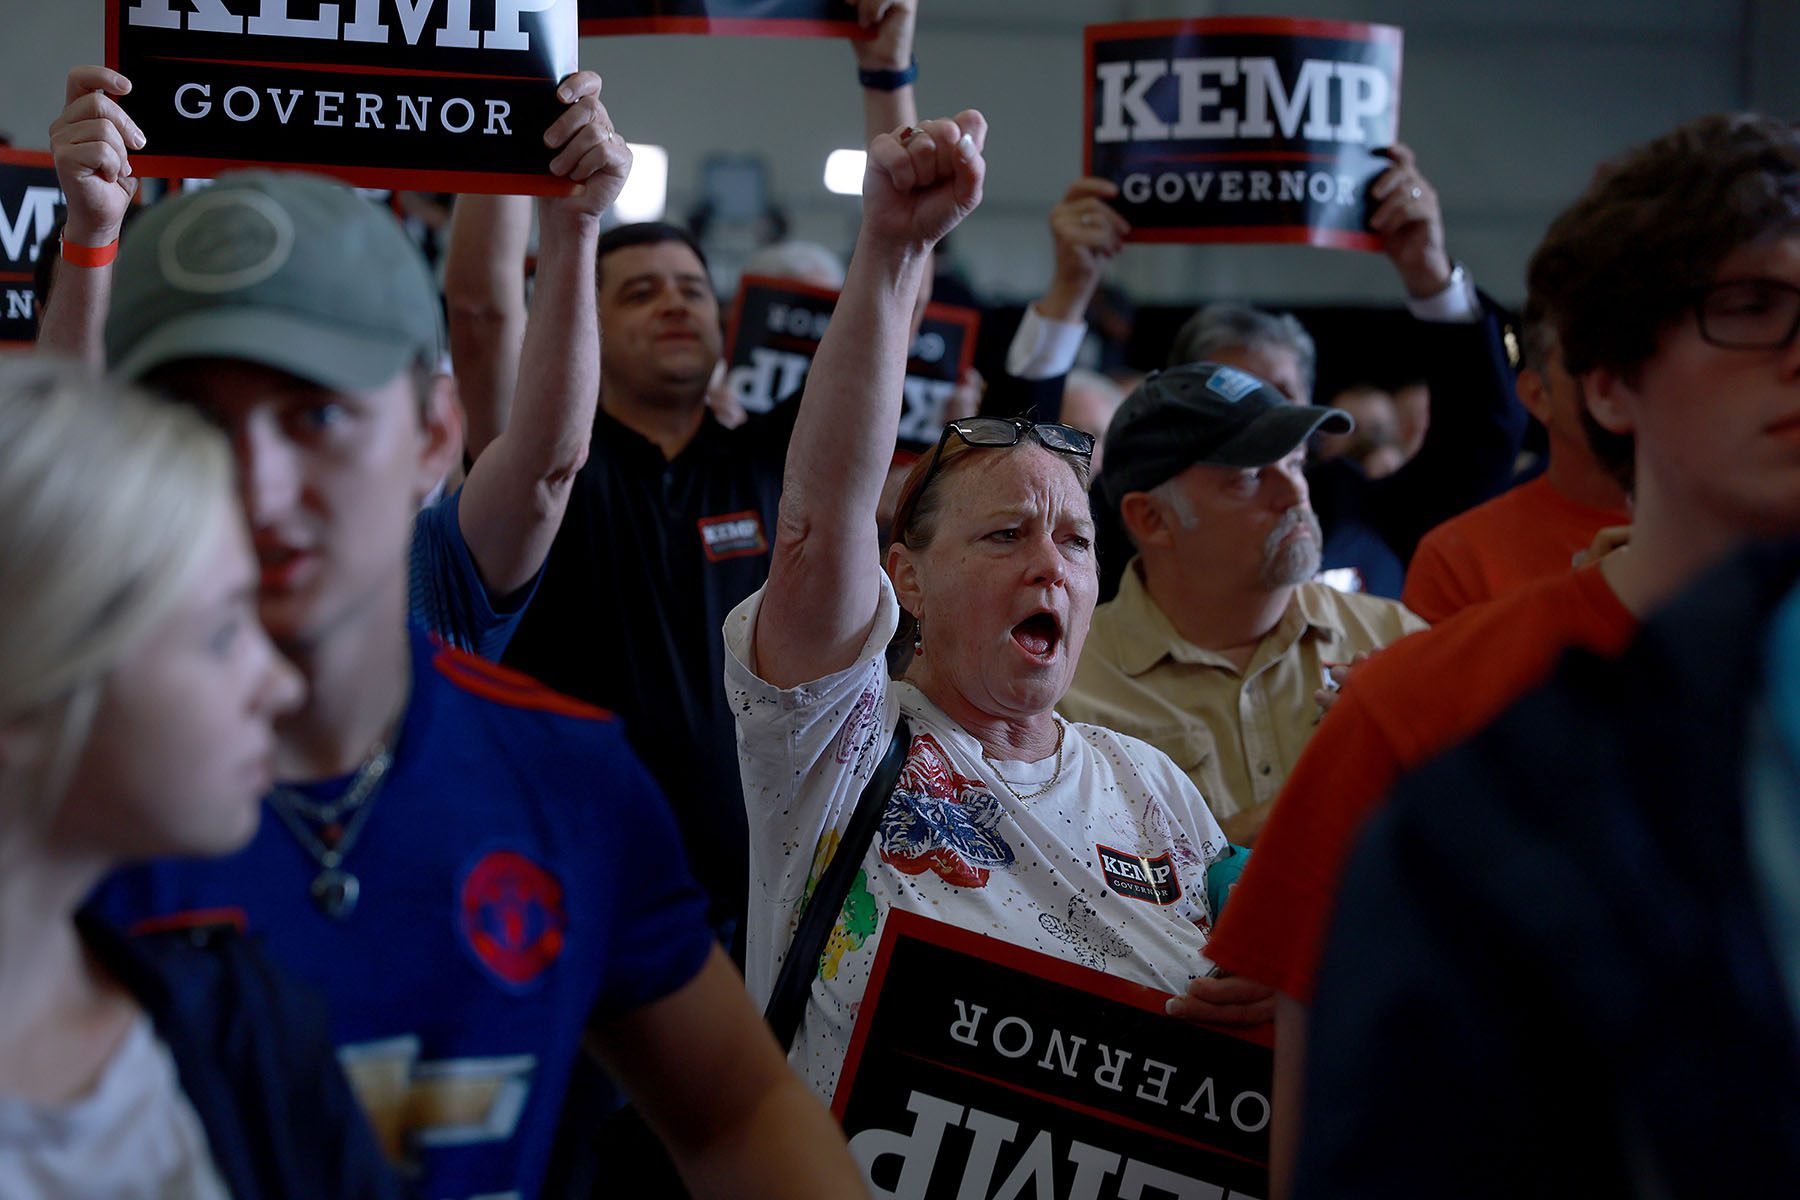 Attendees cheer and hold up signs that read "Kemp Governor."